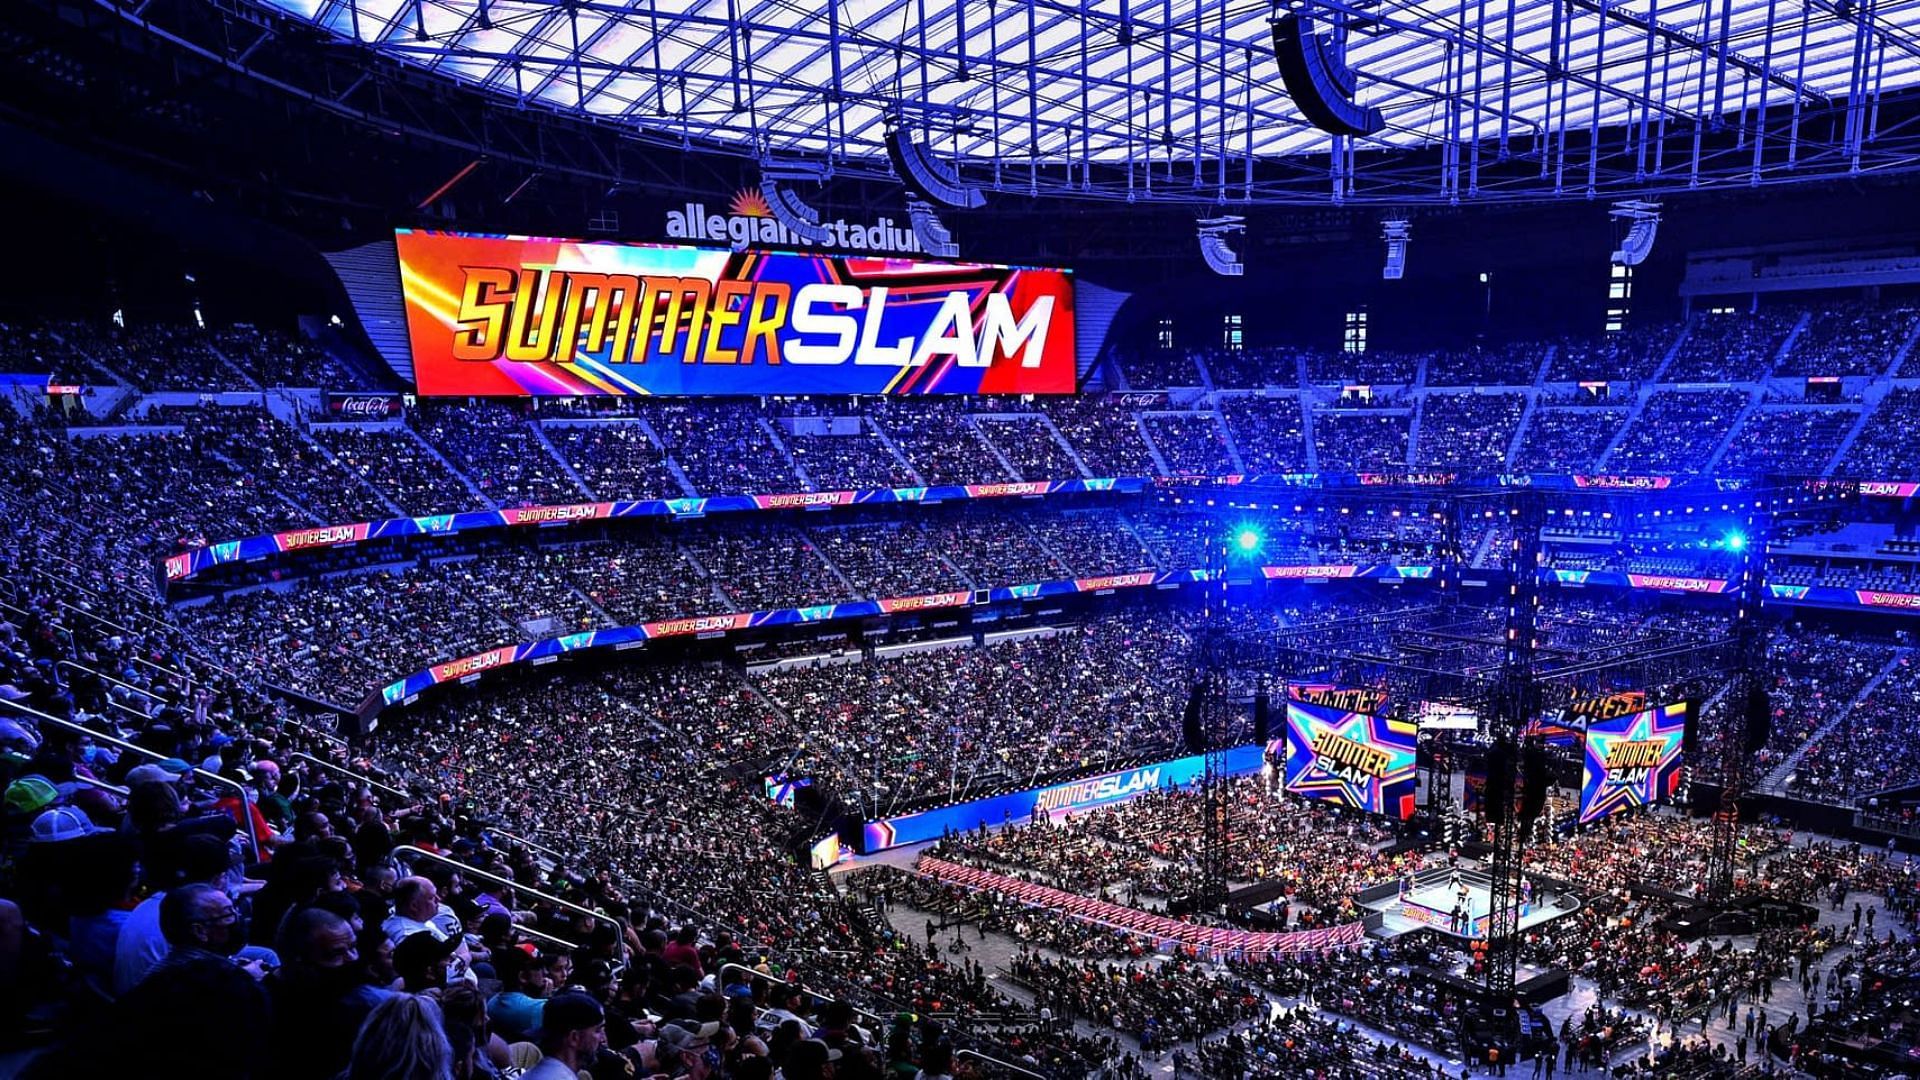 WWE SummerSlam is one of the biggest live events